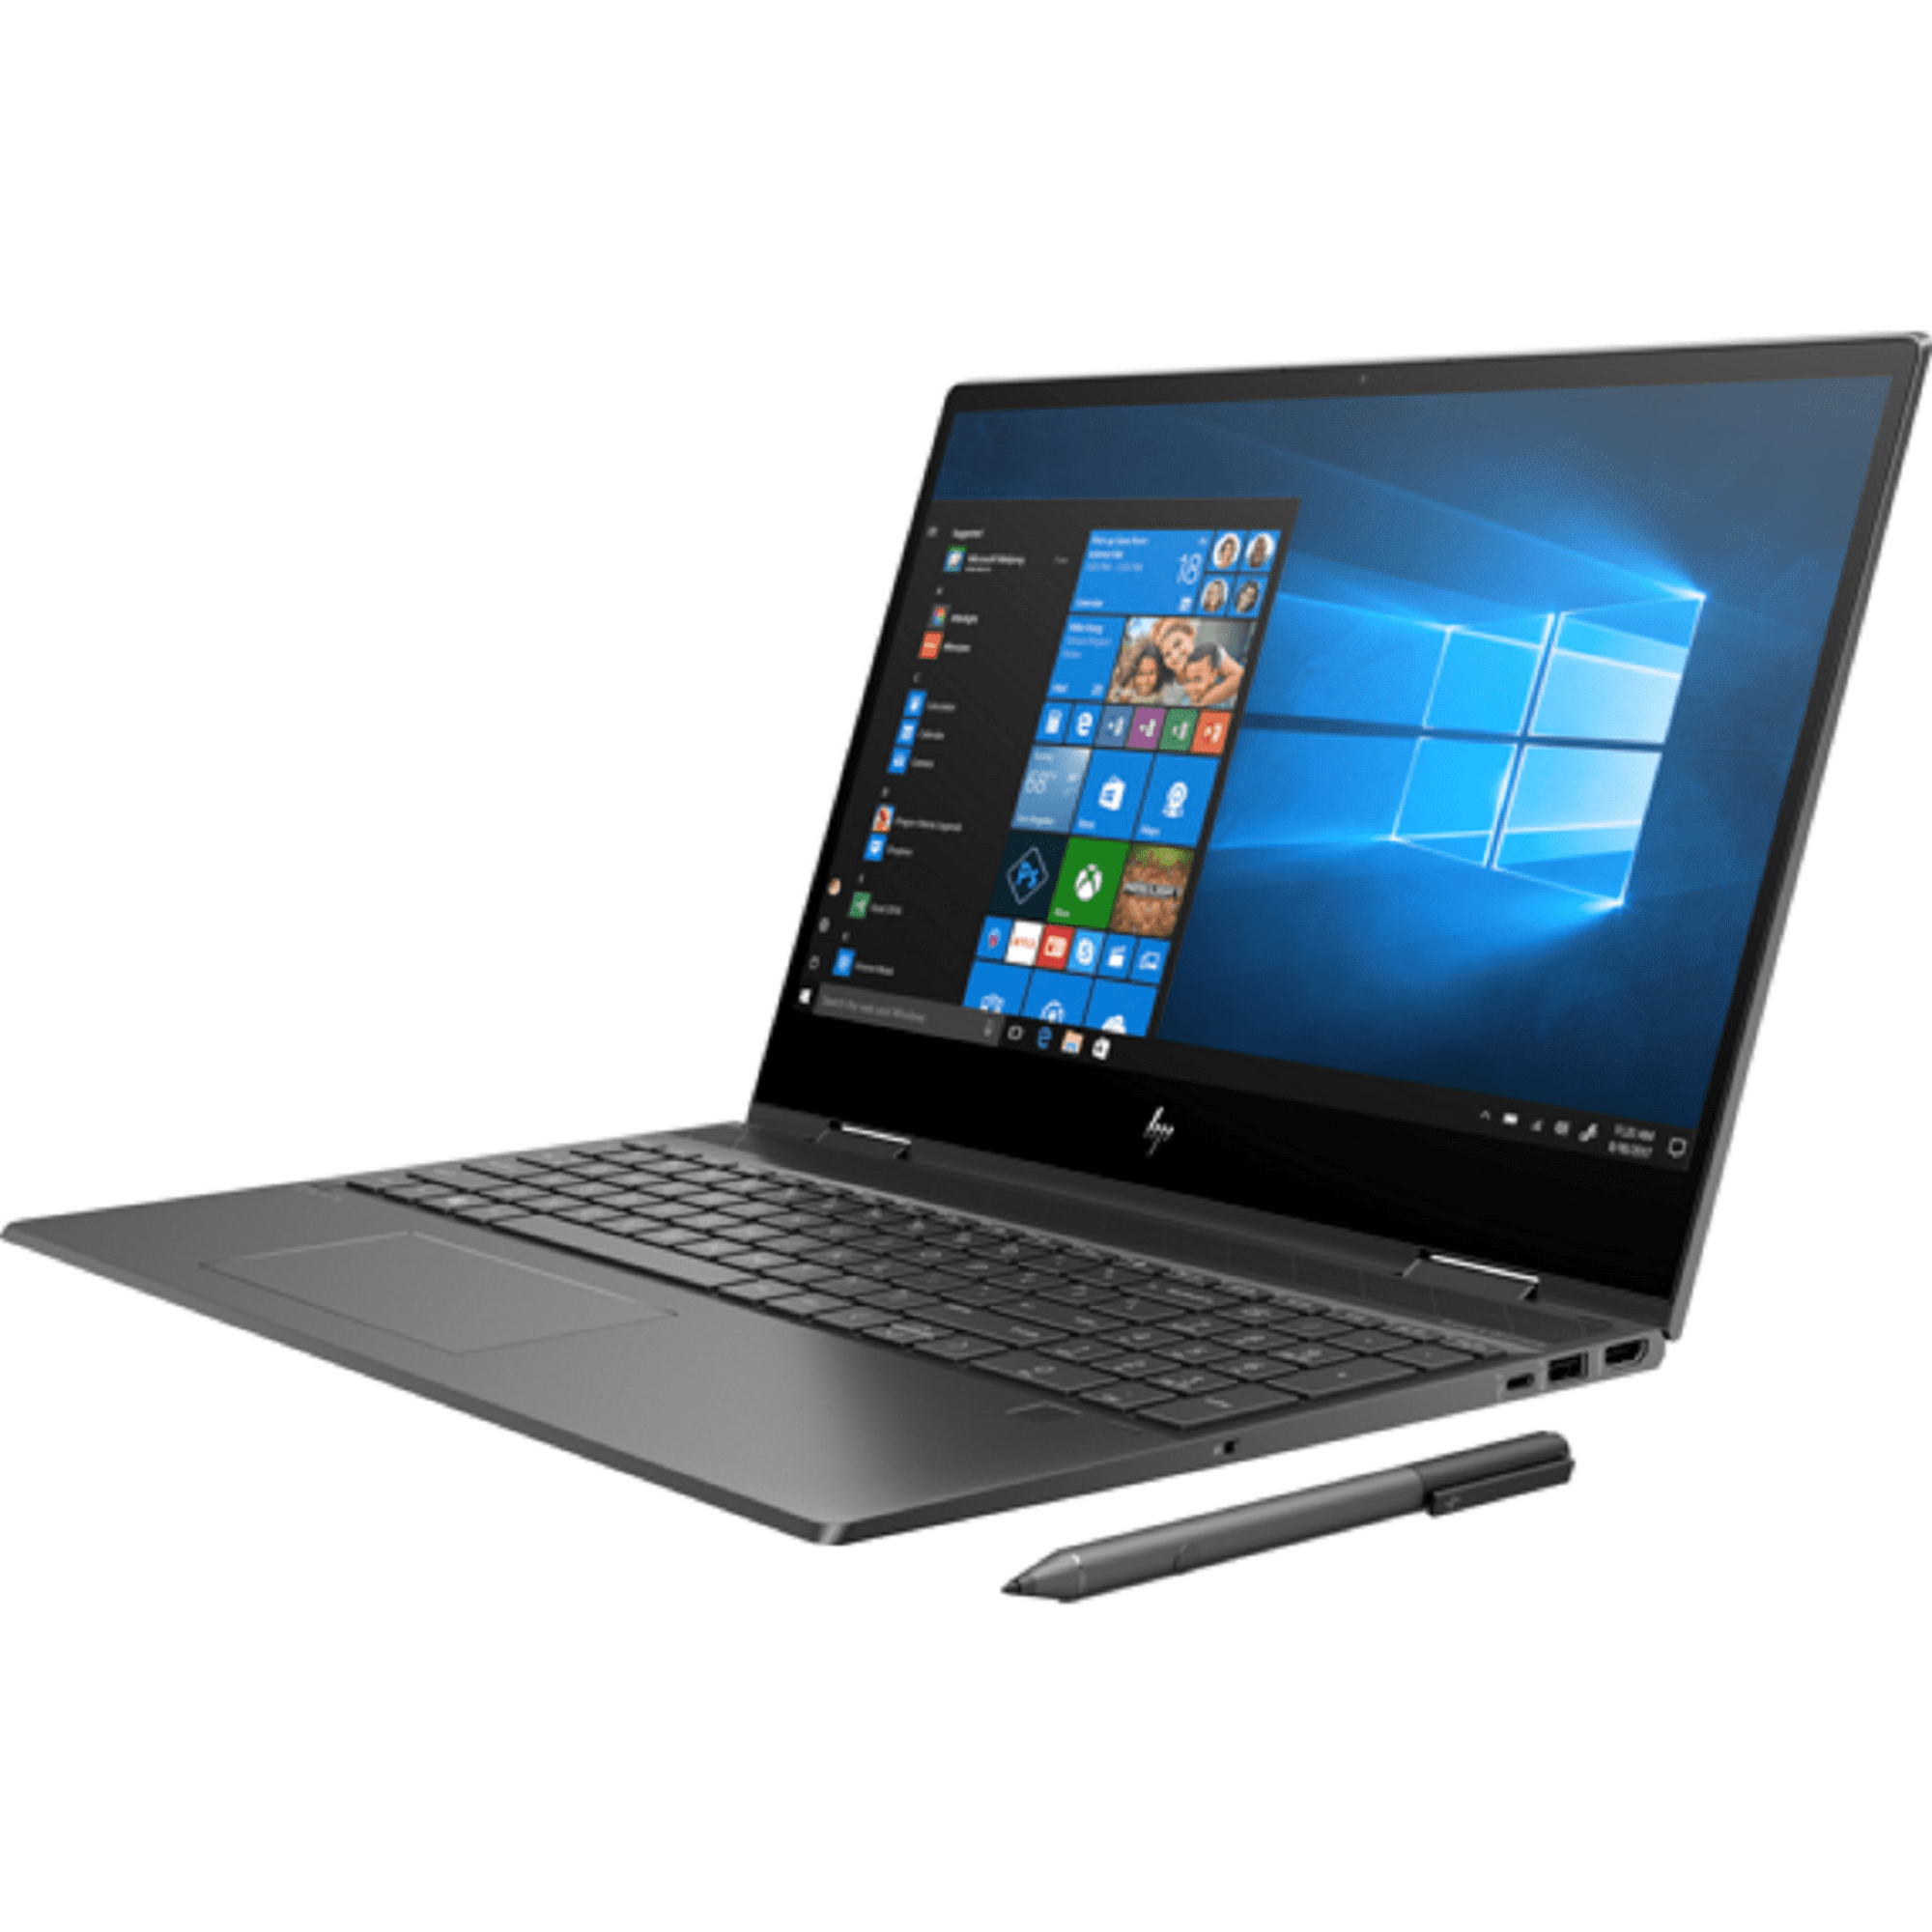 HP ENVY x360 - 15z Home and Business Laptop (AMD Ryzen 7